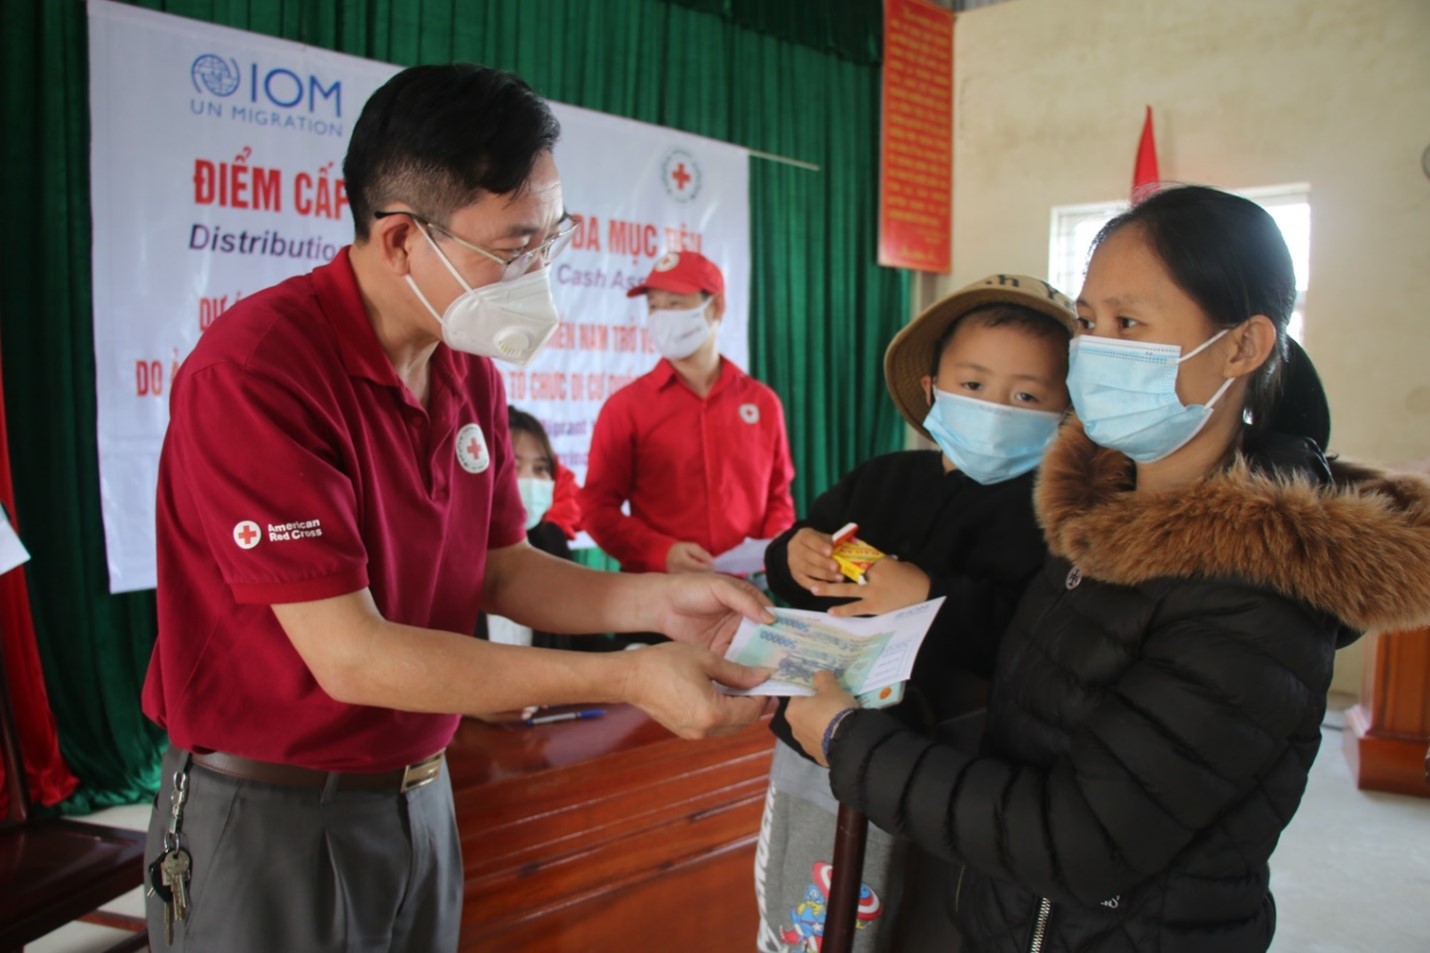 Le Thi Yen received cash assistance from IOM and Red Cross Viet Nam